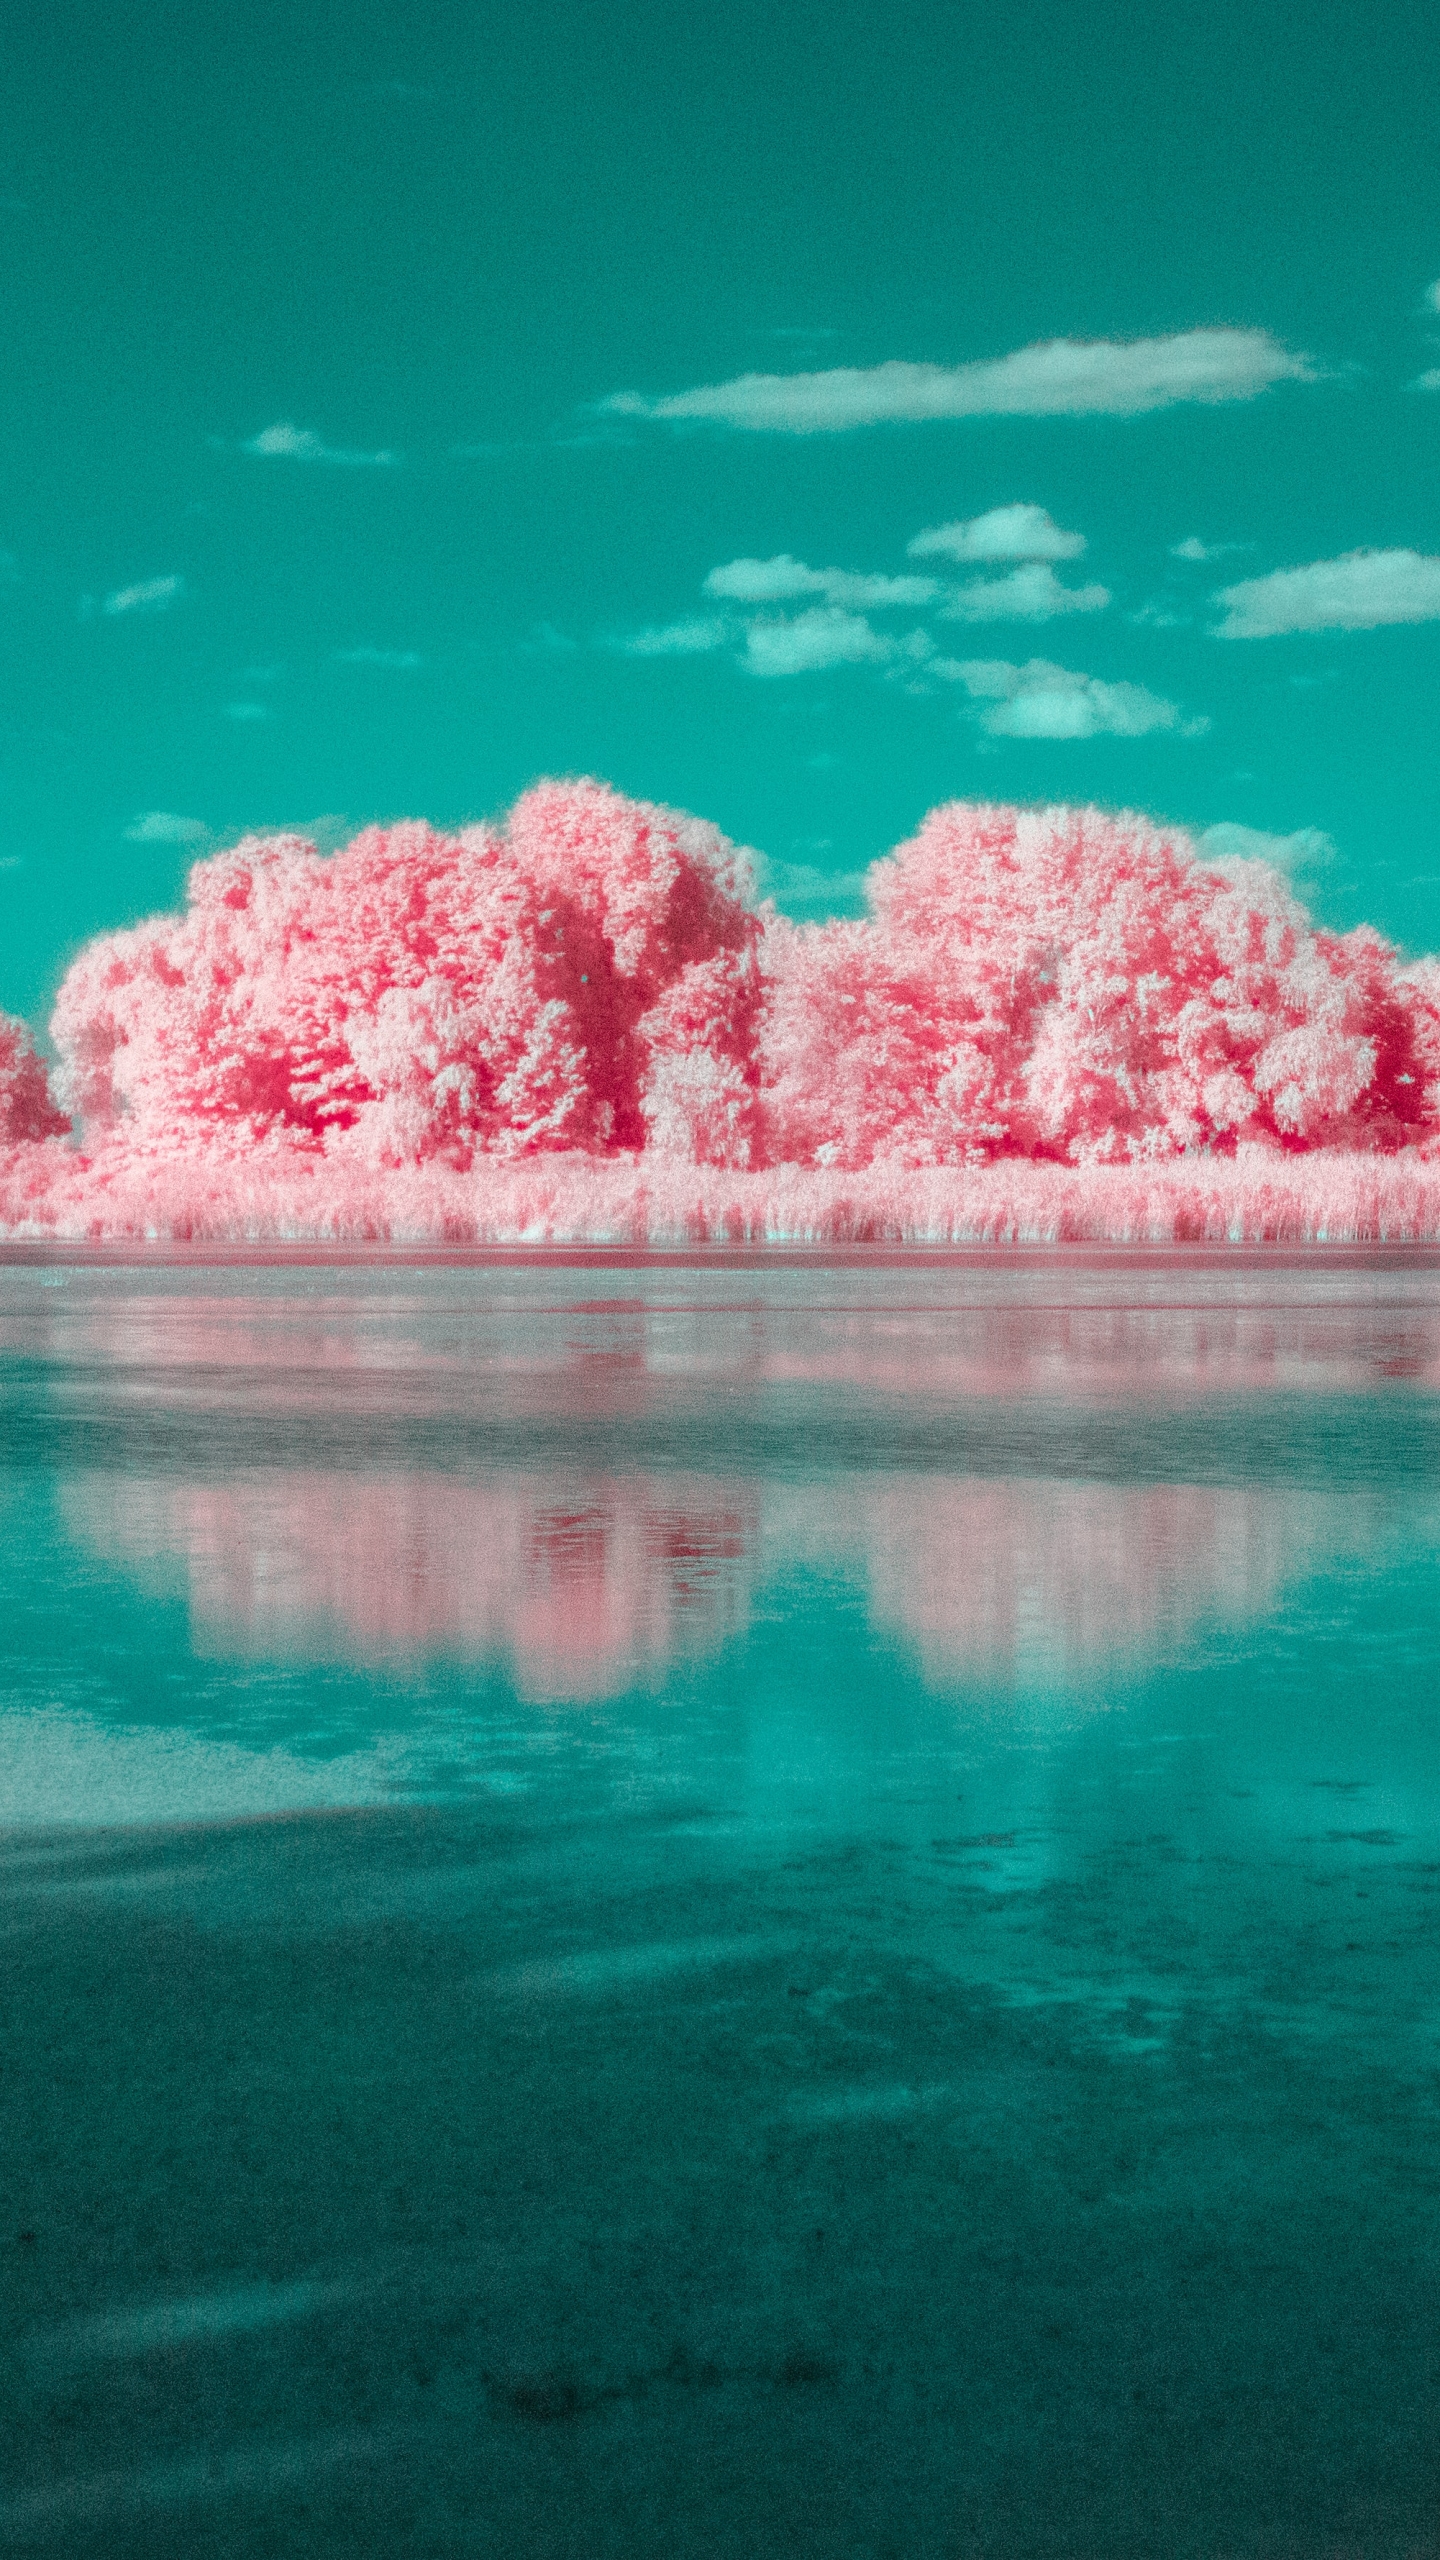 Wallpaper ID 576179  nature water lake winter clouds landscape  infrared 720P sky free download